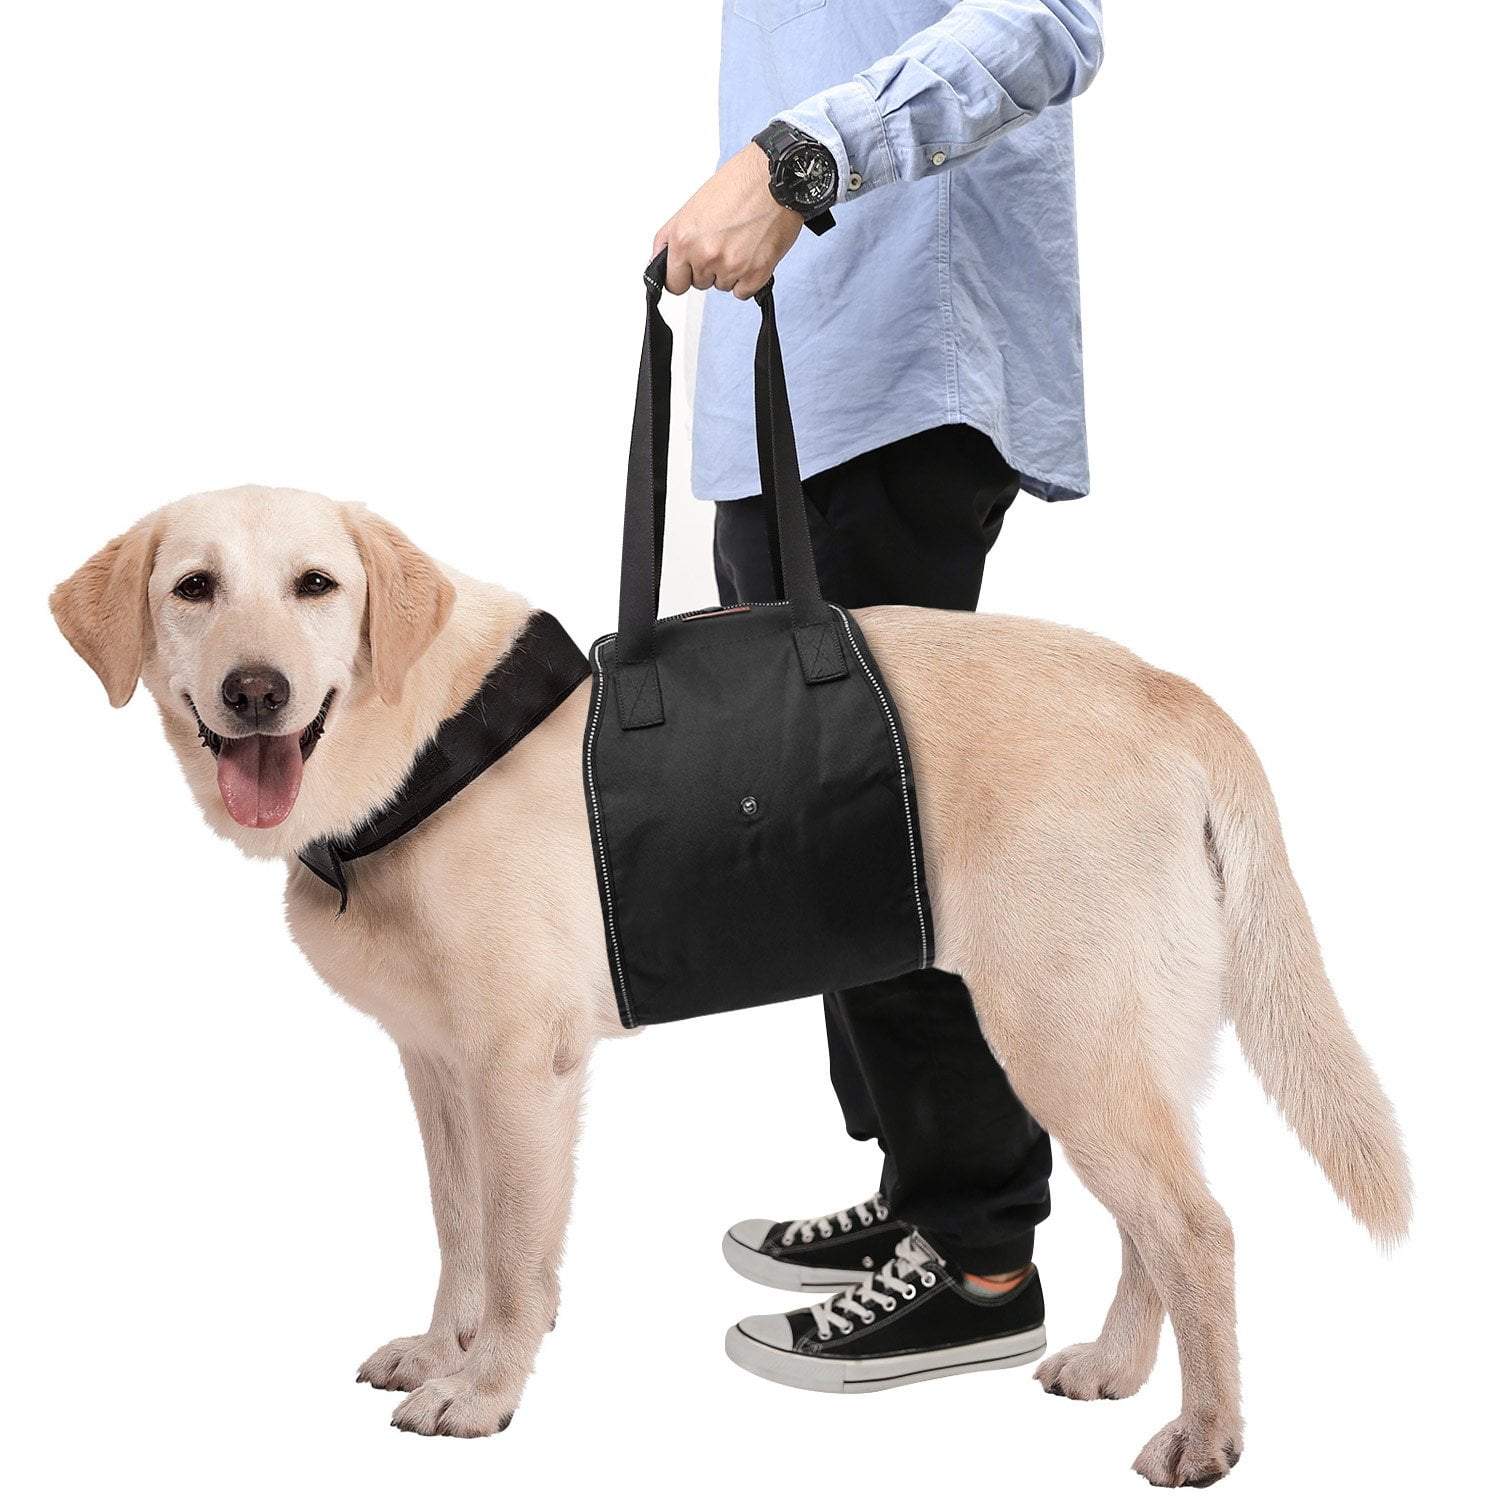 Labra Veterinarian Approved Dog Canine K9 Sling Lift Adjustable Straps Support Harness Helps with Loss of Stability Caused by Joint Injuries and Arthritis ACL Rehabilitation Rehab 